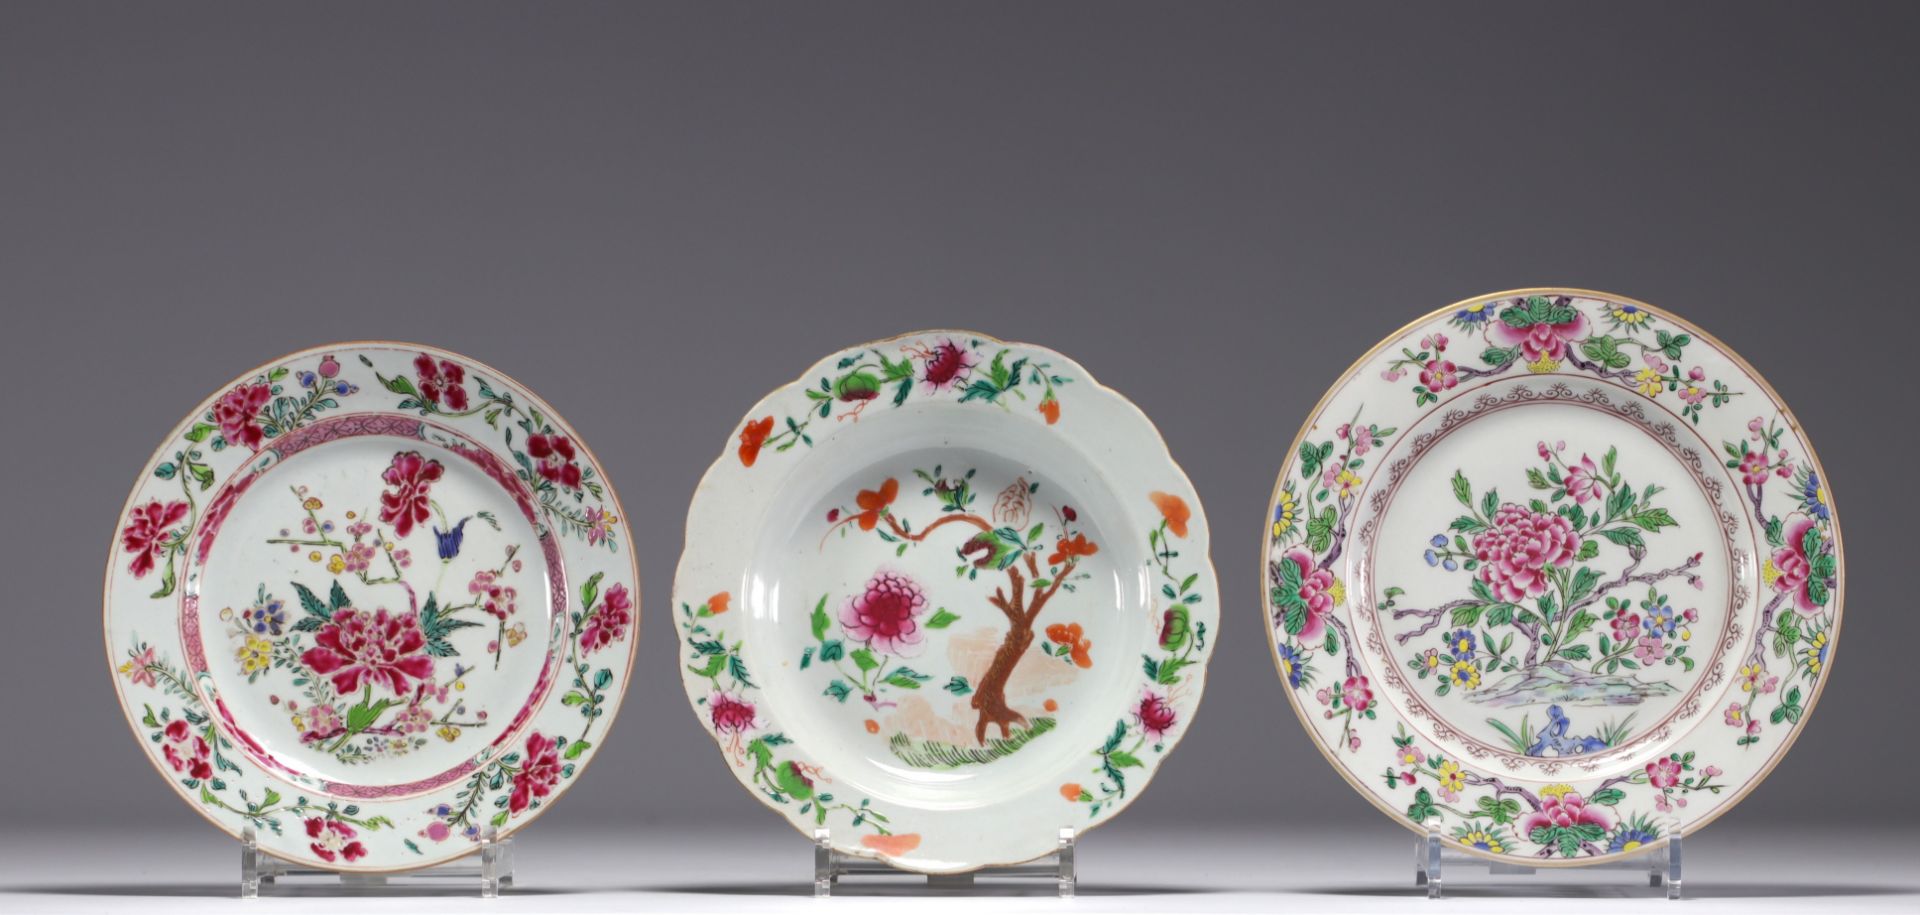 China - Set of three Famille Rose porcelain plates with floral decoration.